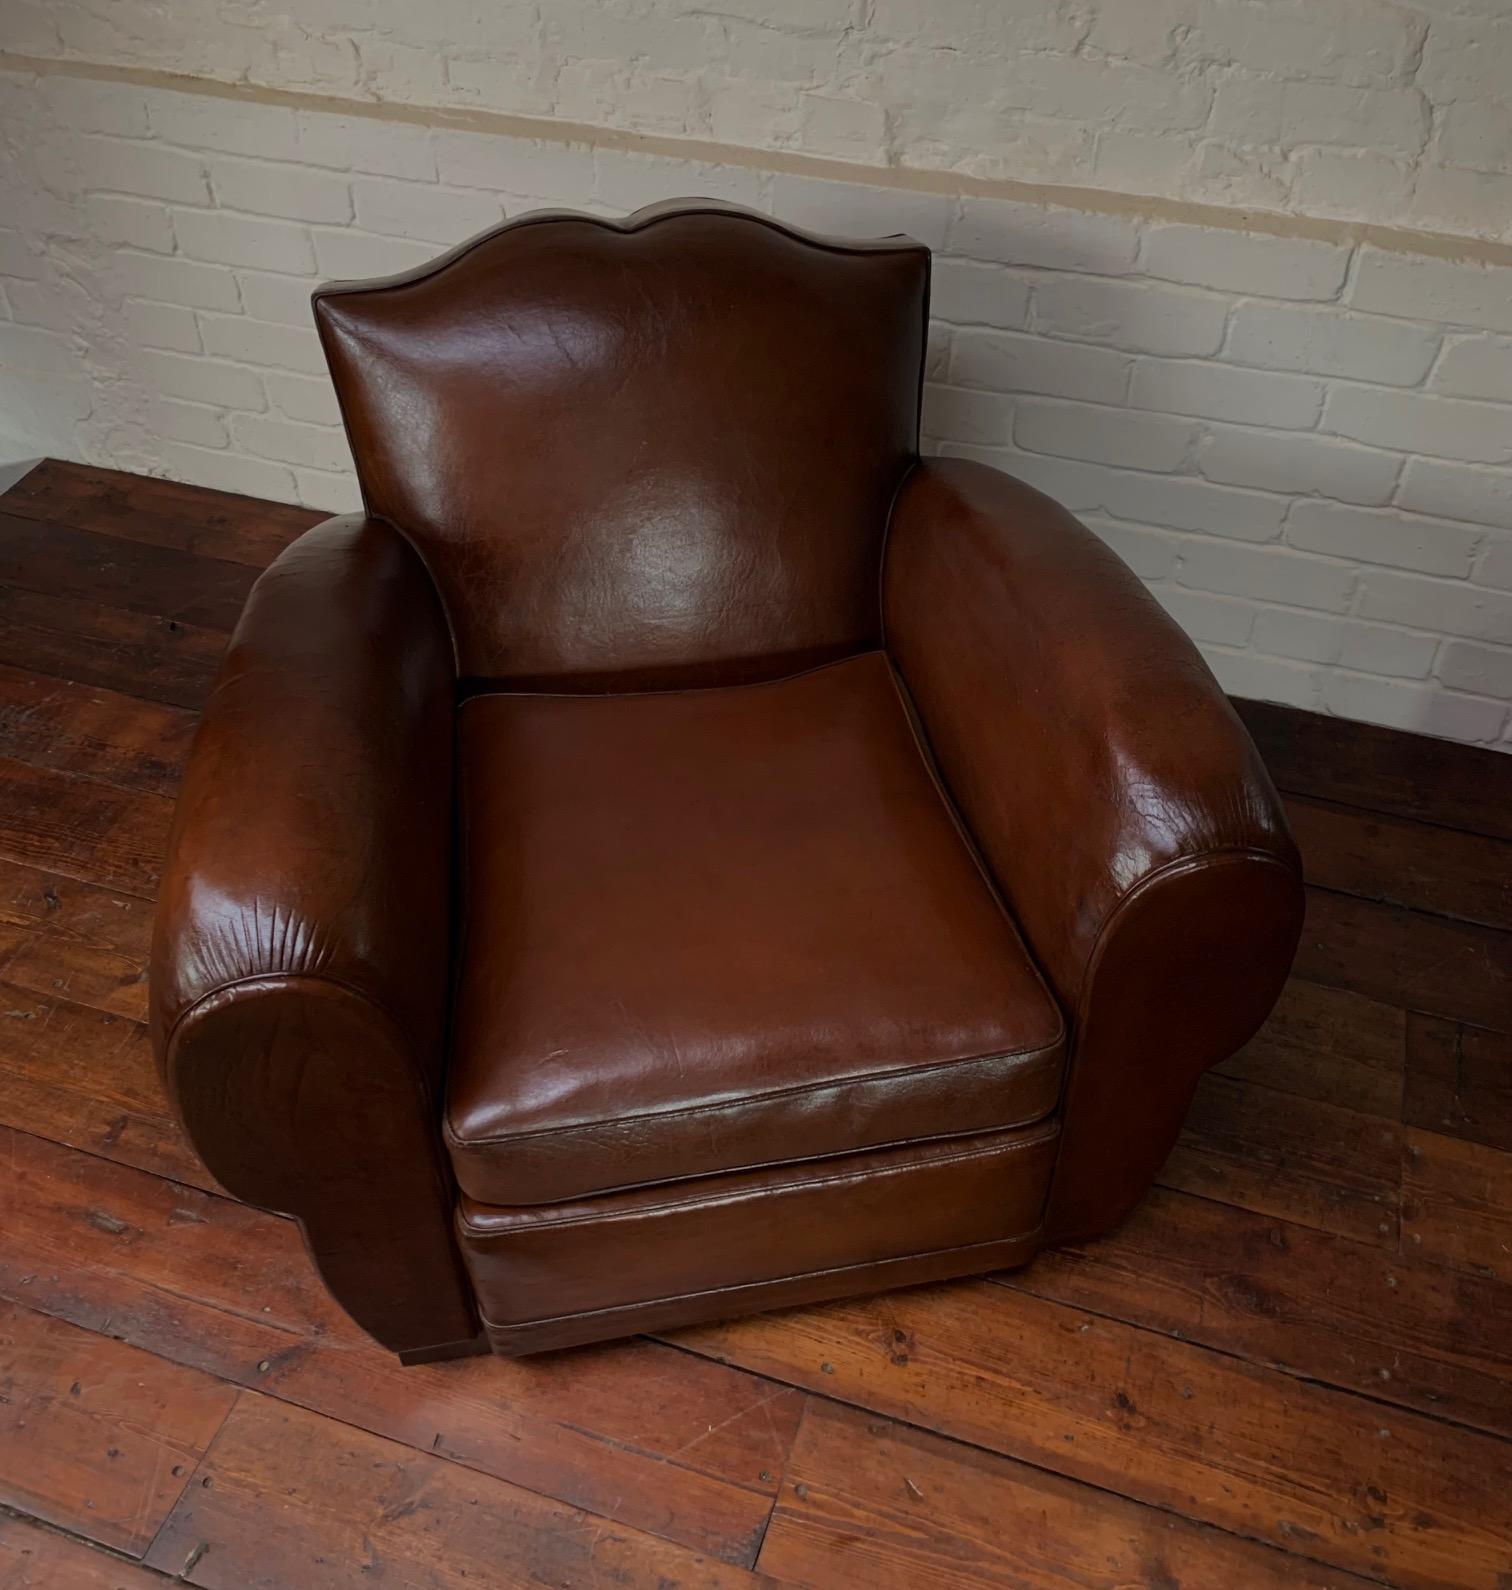 This beautiful and rare chair is a fantastic example, it is the classic of classics, in its original Havana brown leather, with Cuban cigar arms and a low-slung back; this chair has got the lot. The patina is gorgeous and testament to its first